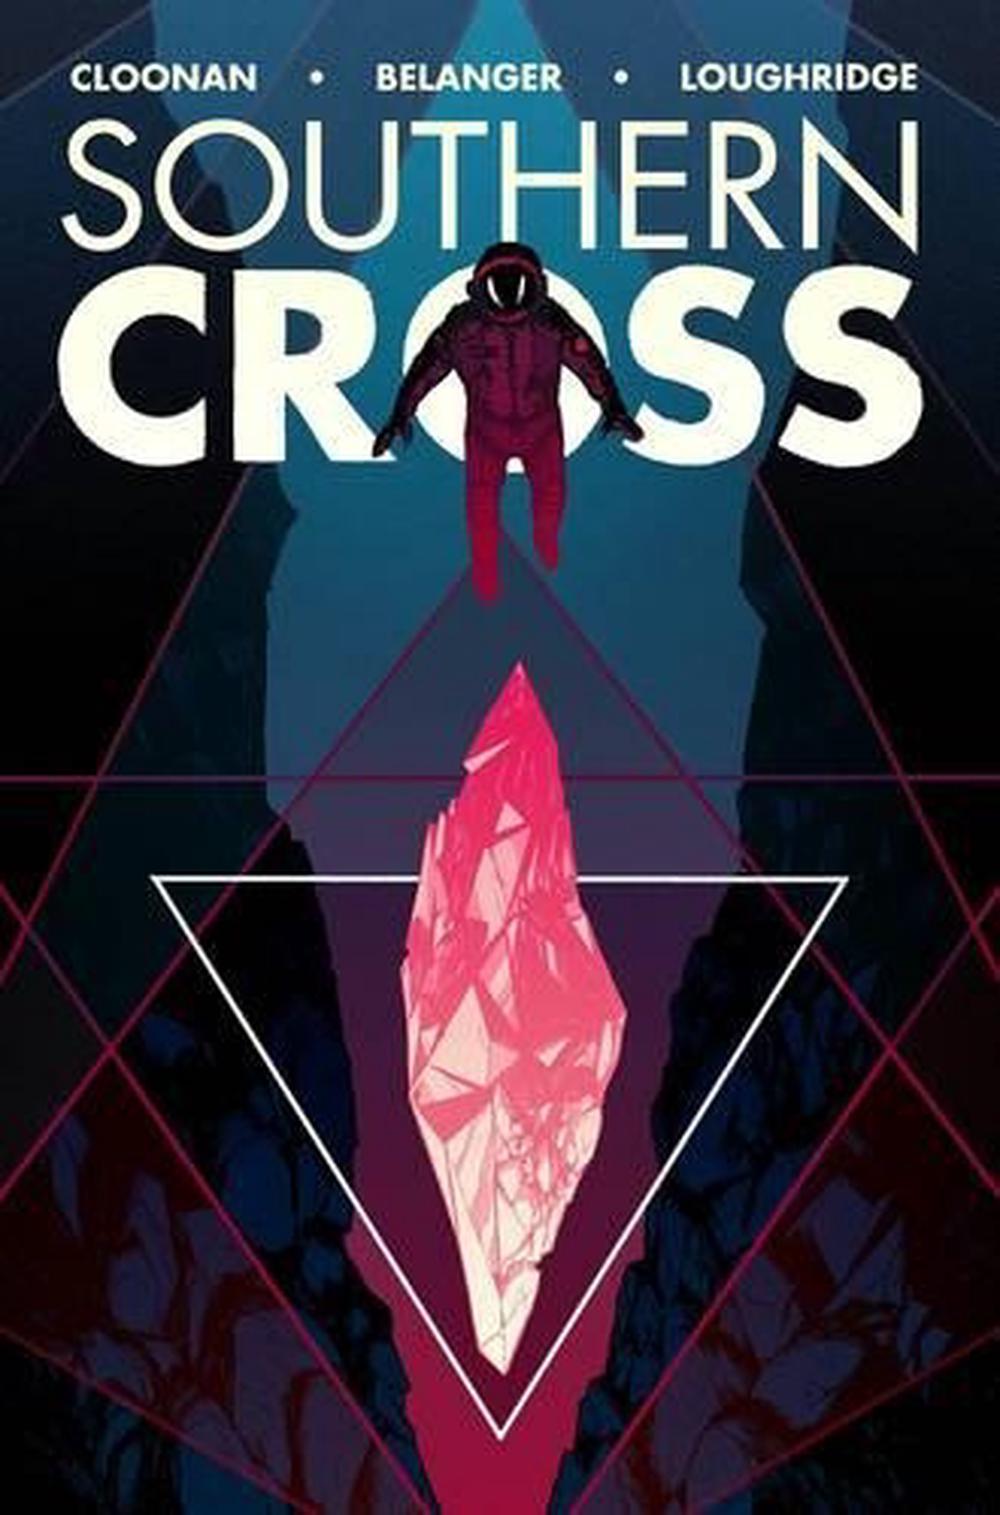 Southern Cross, Vol. 1 by Becky Cloonan